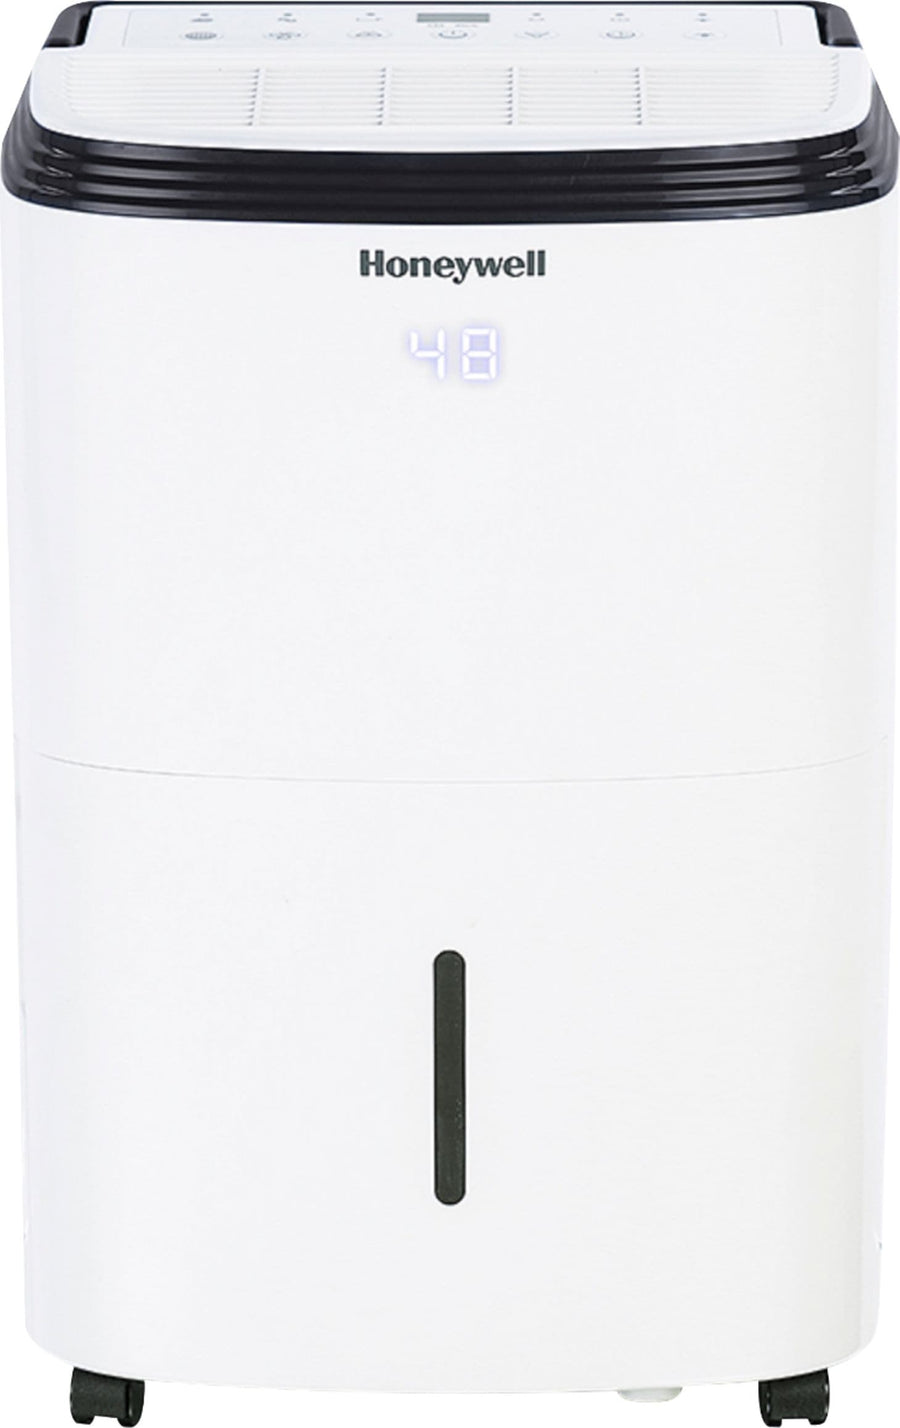 Honeywell - Smart WiFi Energy Star Dehumidifier for Basements & Rooms Up to 4000 Sq.Ft. with Alexa Voice Control & Anti-Spill Design - White_0